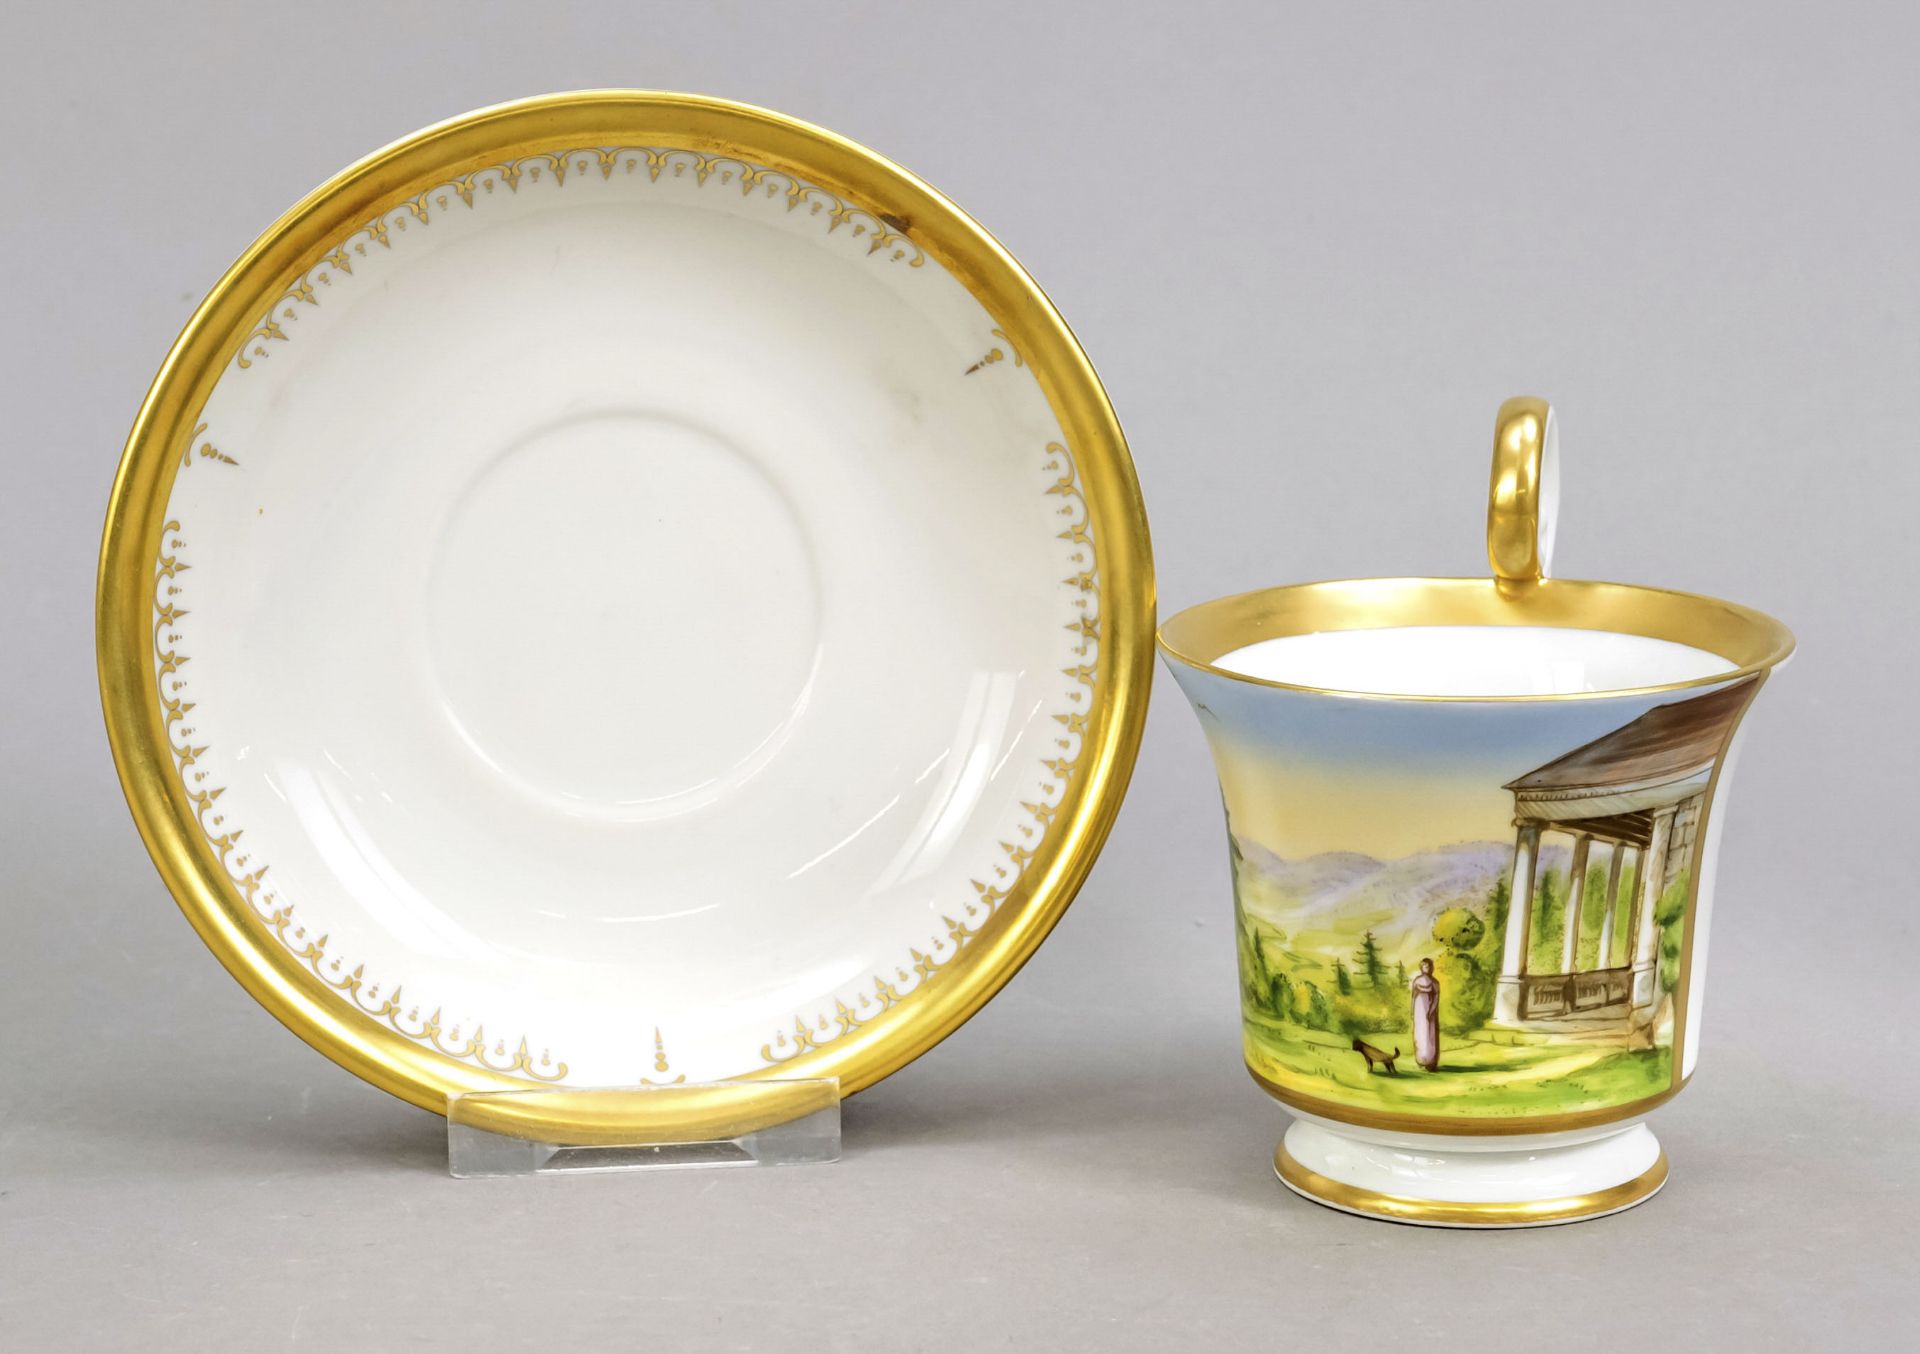 View cup and saucer, Pirkenhammer, Czechoslovakia, 20th century, bell shape with rosette handle,